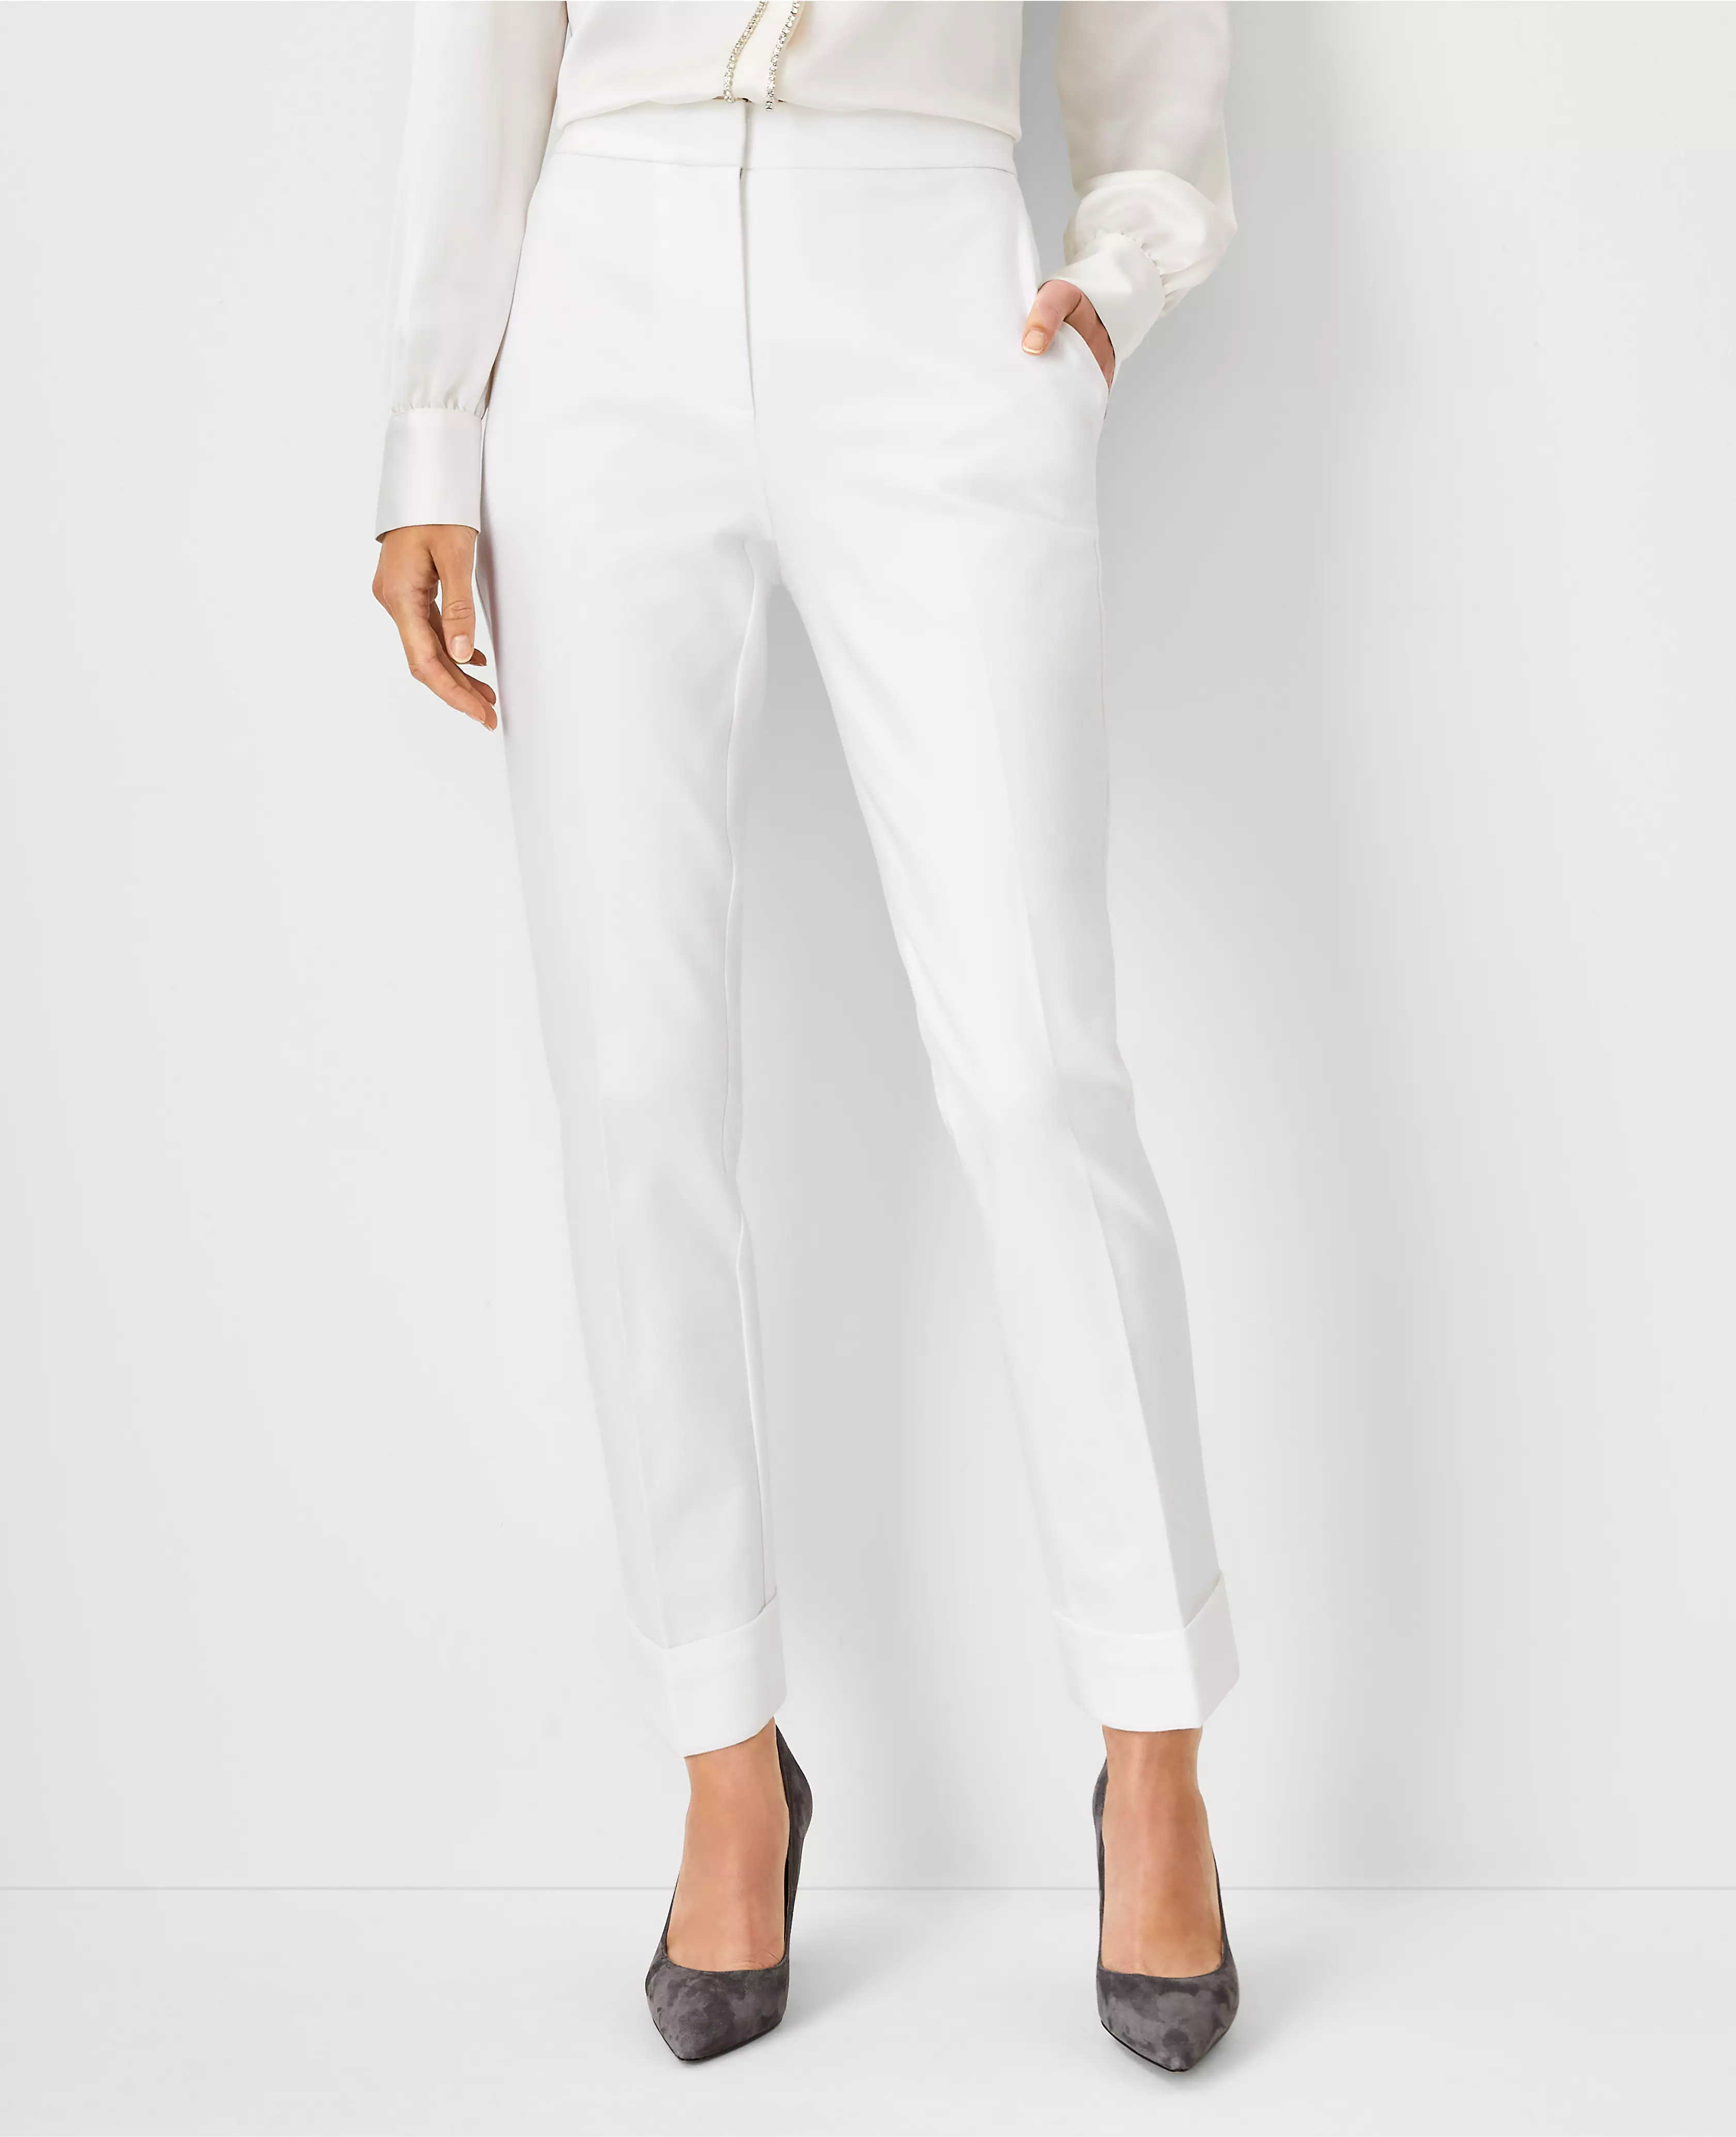 The Tall High Rise Eva Ankle Pant